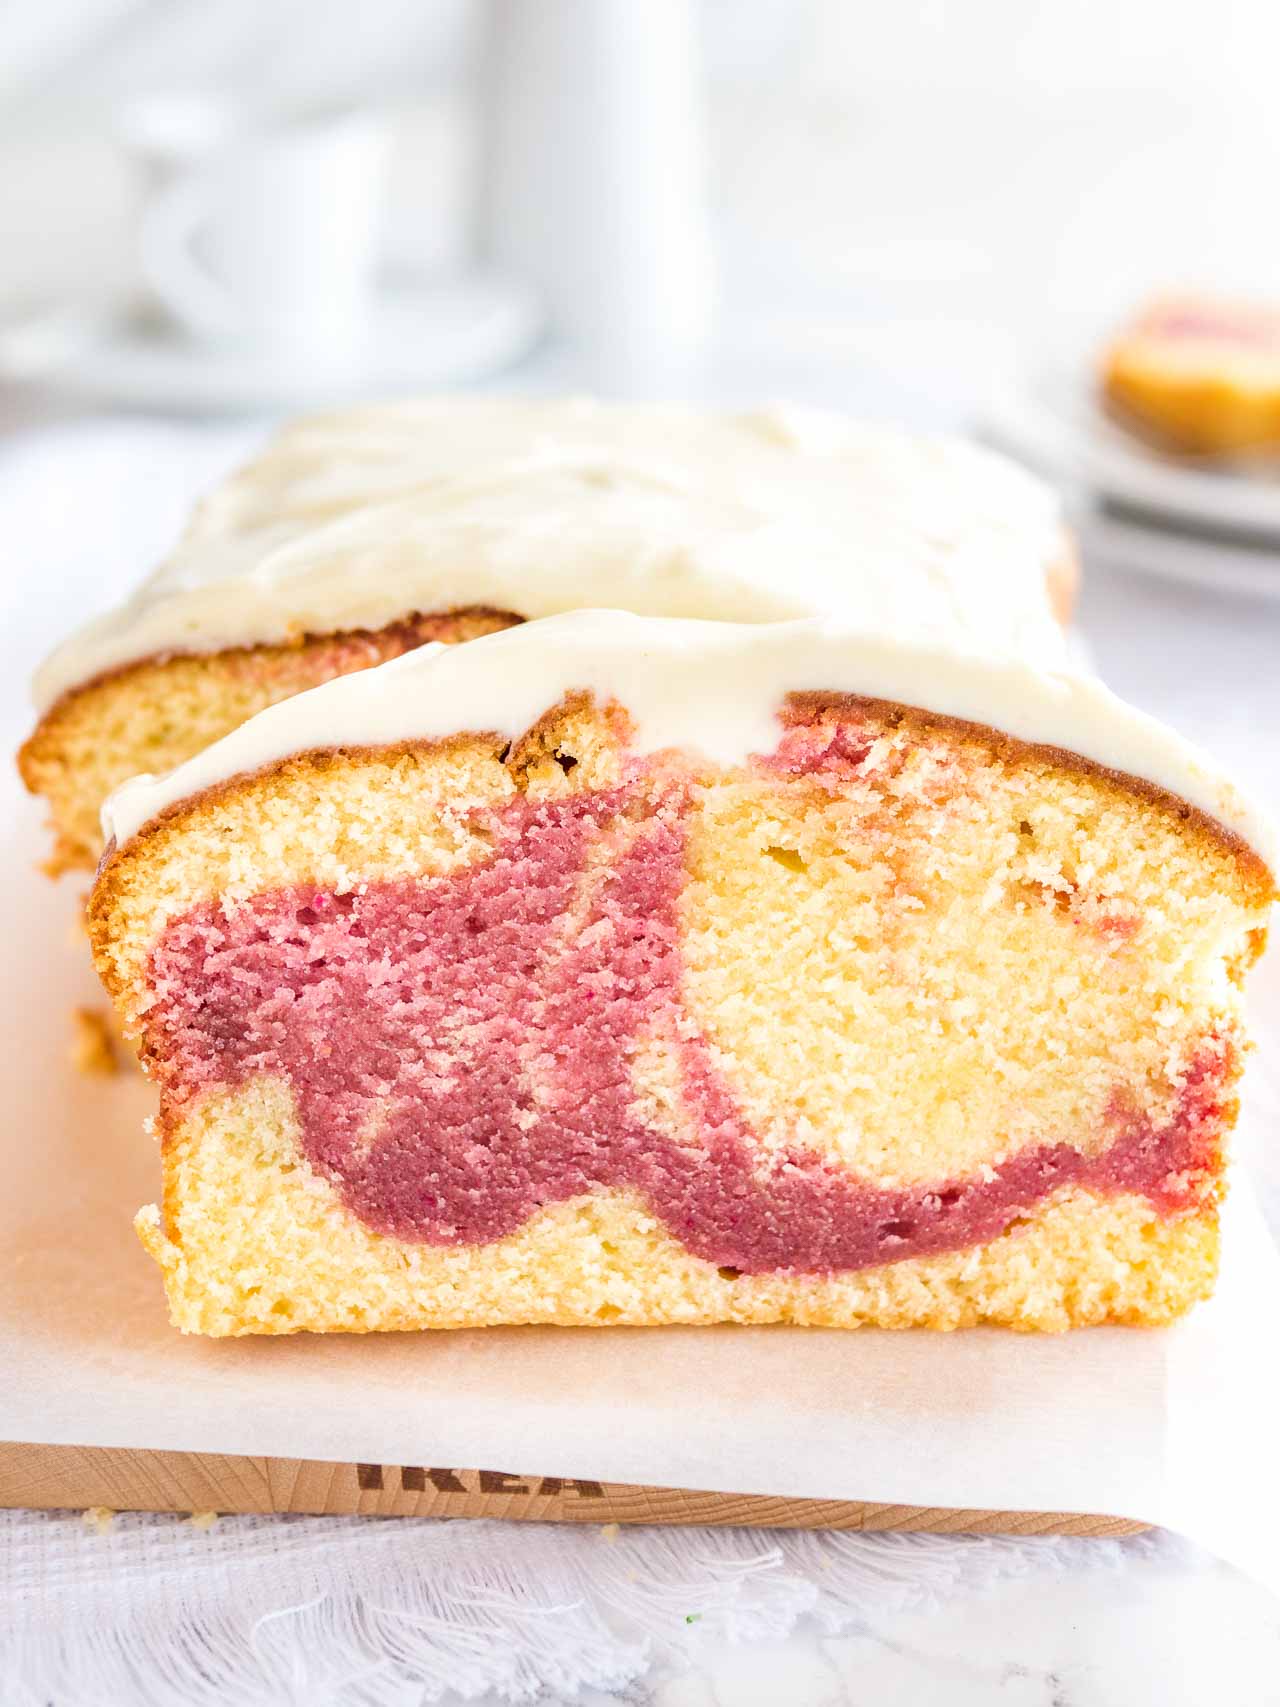 Peek-a-Boo Pound Cake with Raspberry Cream Cheese Frosting